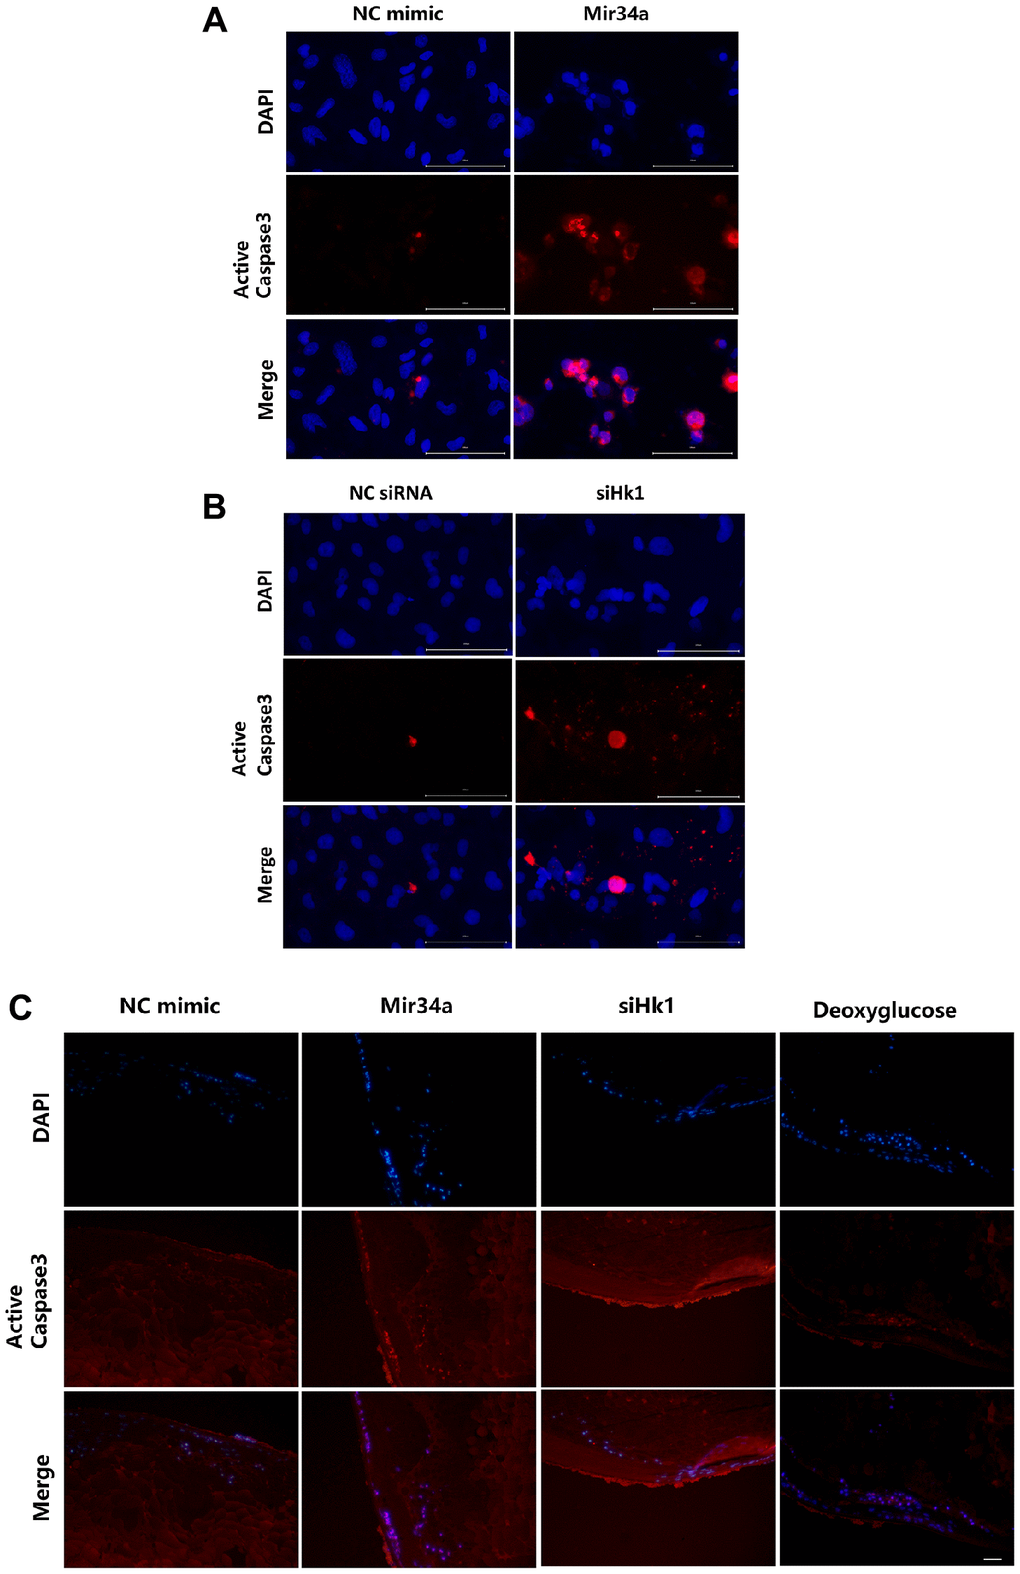 MIR34A modulates LECs apoptosis and cataract development through the HK1/caspase 3 signaling pathway. (A) SRA01/04 cells were transfected with MIR34A mimic and the expression of active caspase 3 at 120 h was detected by immunofluorescence. Scale bars: 100 μm. (B) SRA01/04 cells were transfected with siHK1 and the expression of active caspase 3 at 120 h was detected by immunofluorescence. Scale bars: 100 μm. (C) Lens explants of mice were co-cultured with Mir34a, siHk1, or deoxyglucose, and the expression of active caspase 3 of lens epithelium was detected by immunofluorescence. Scale bars: 20 μm.